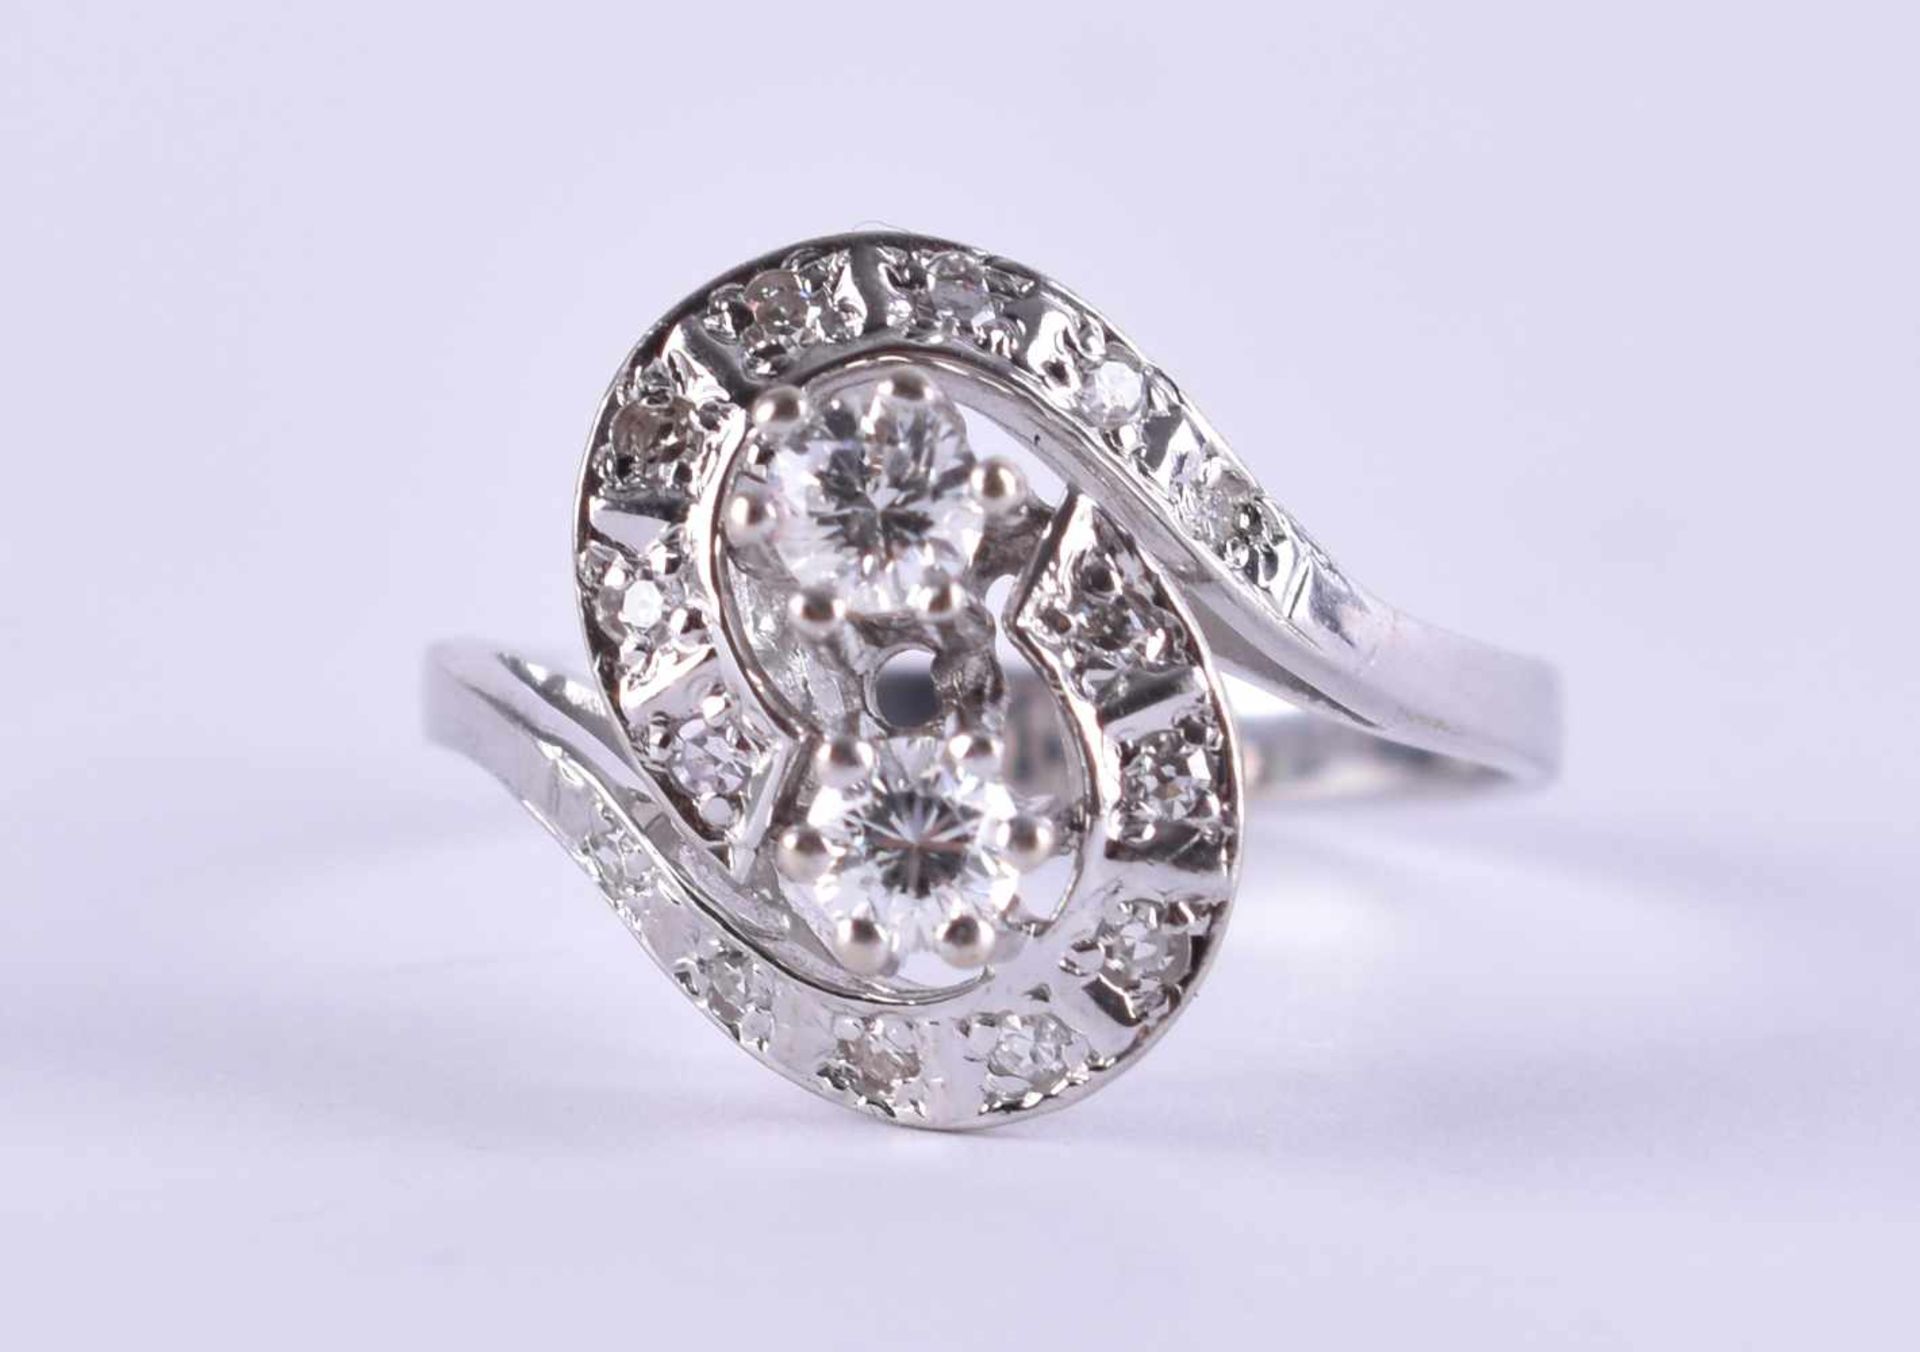 Ladies diamond ringwhite gold 585/000, set with brilliants, together approx. 0.50 ct, ring size